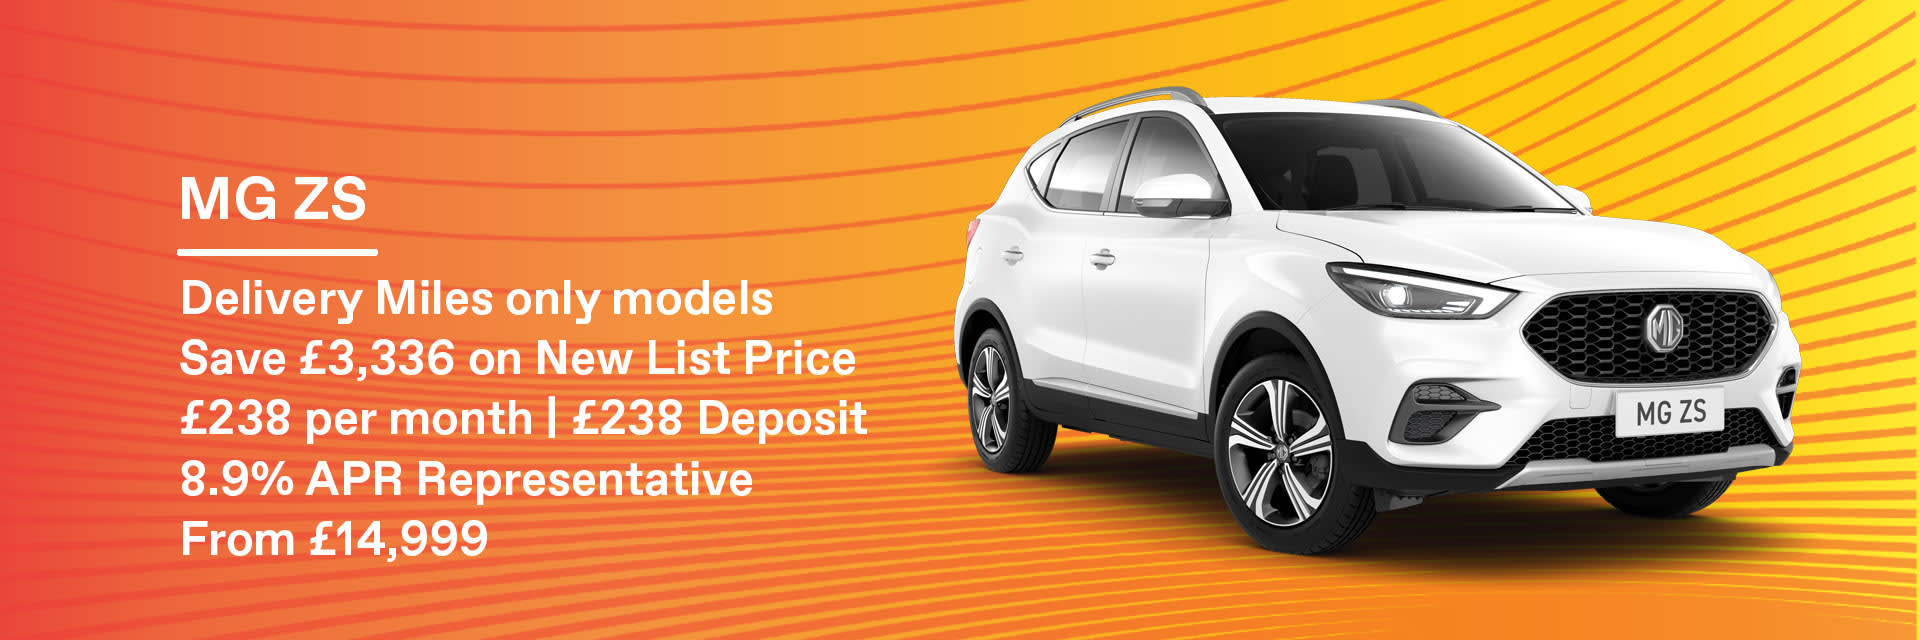 Big savings on MG ZS delivery miles only models